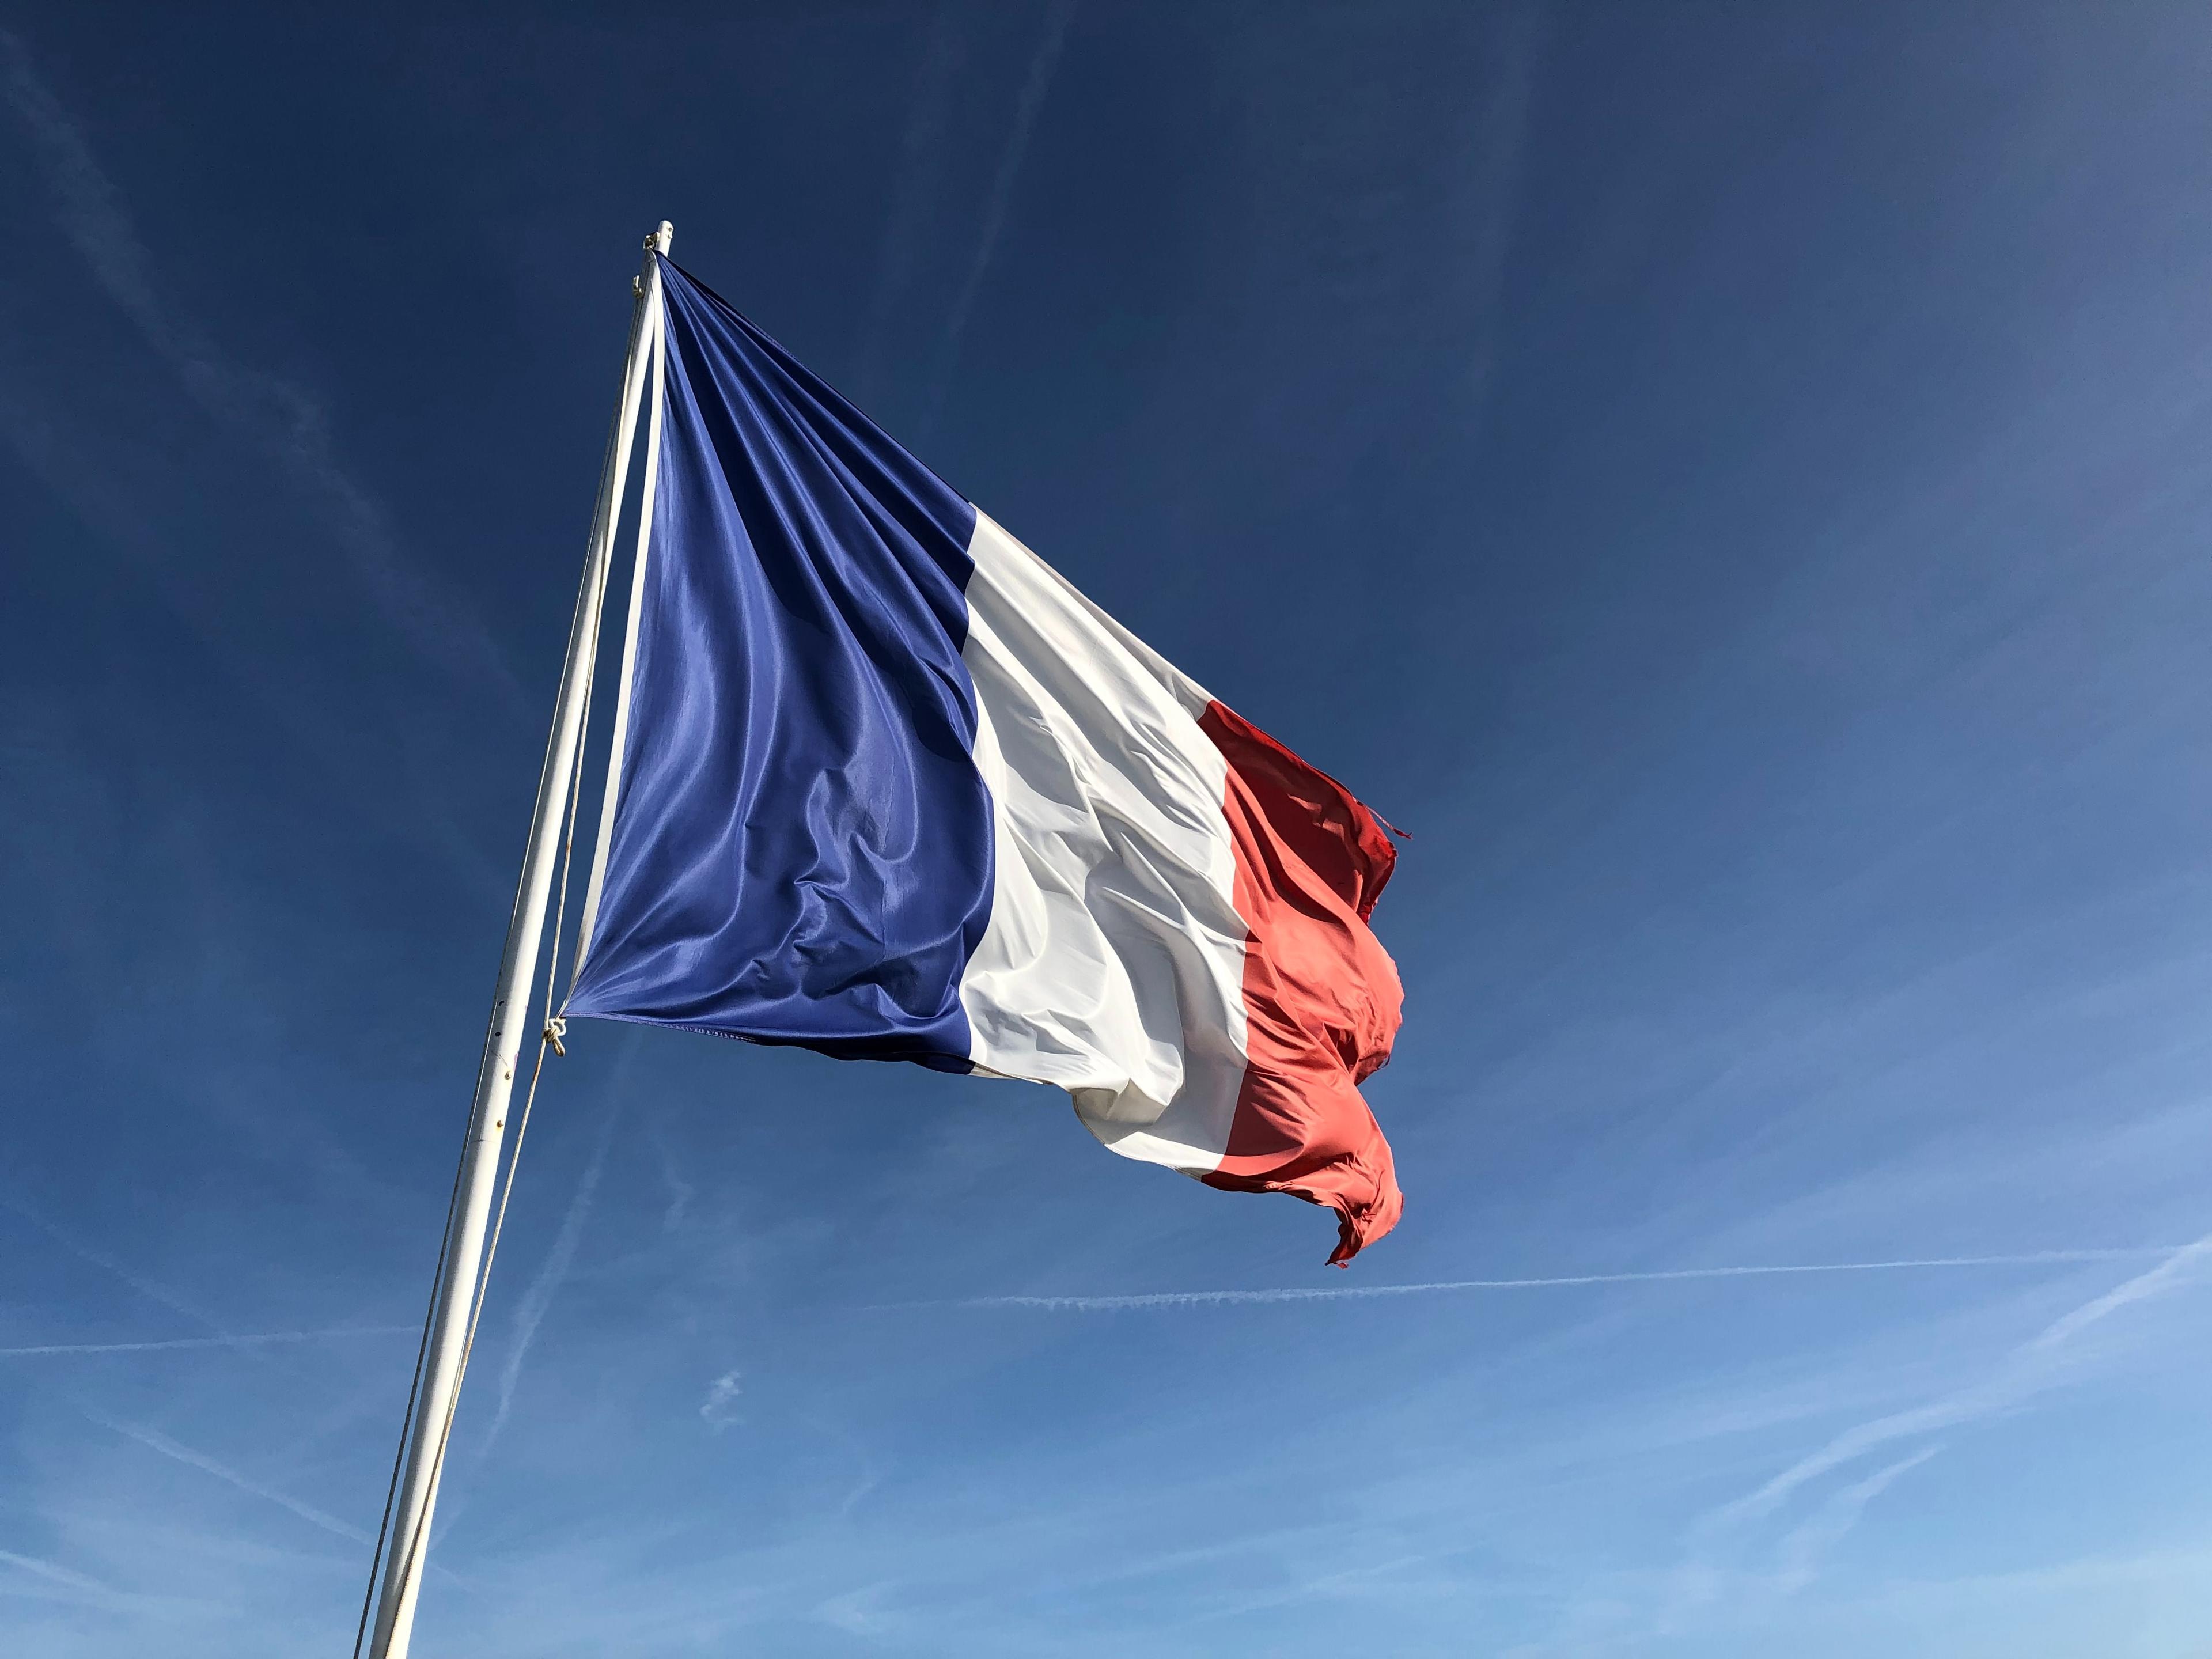 French flag flapping in wind